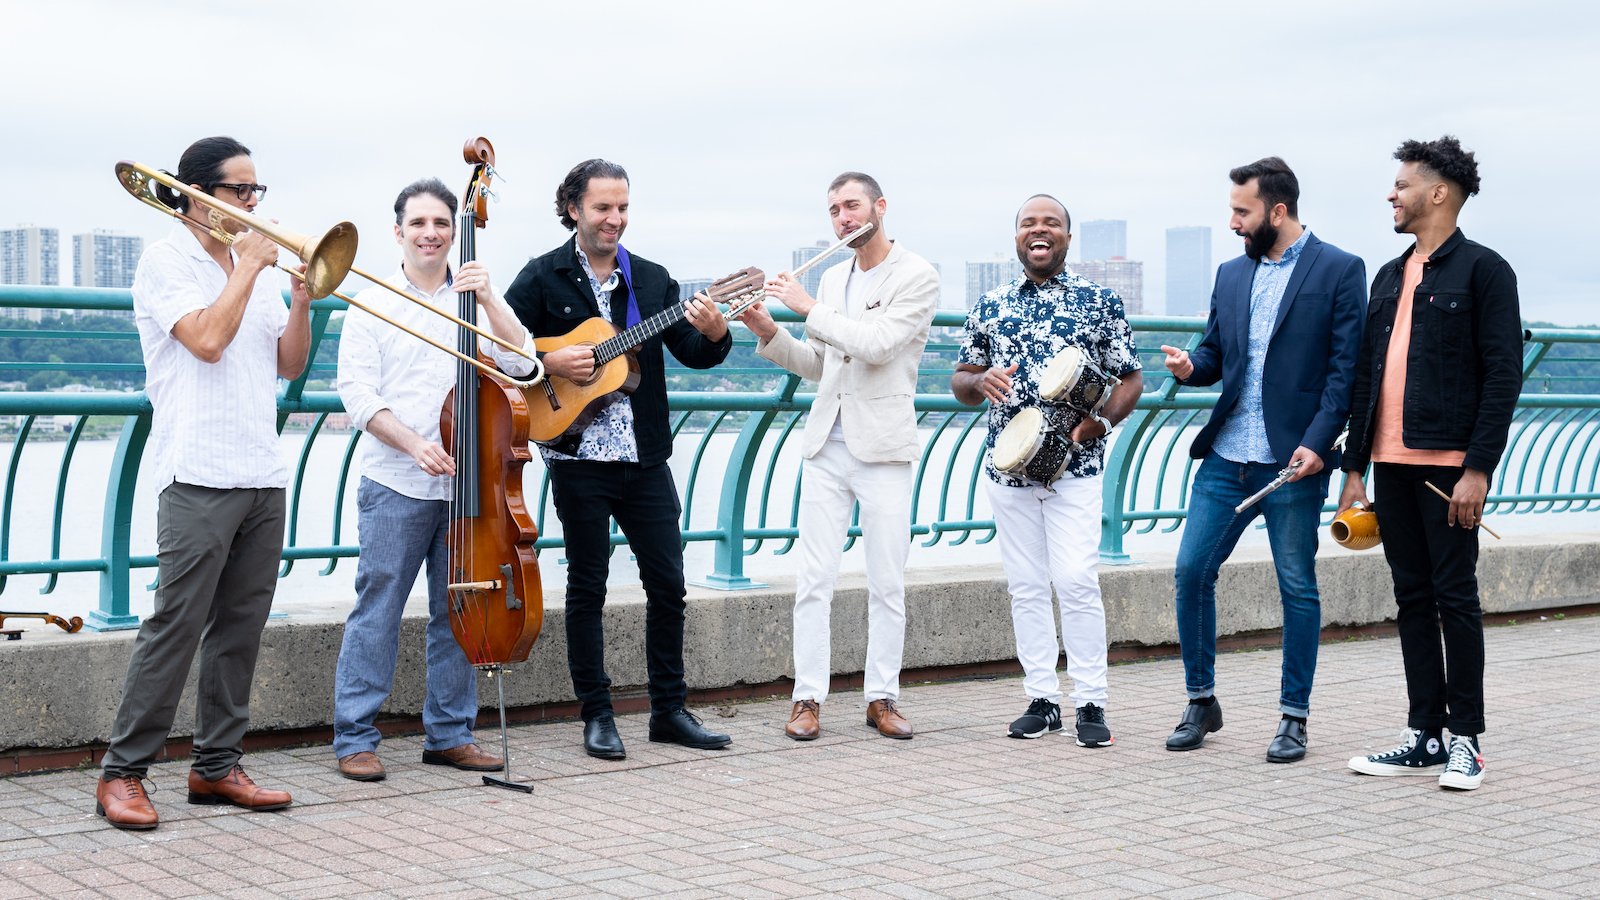 A group of musicians stands by a waterfront joyously playing their instruments.